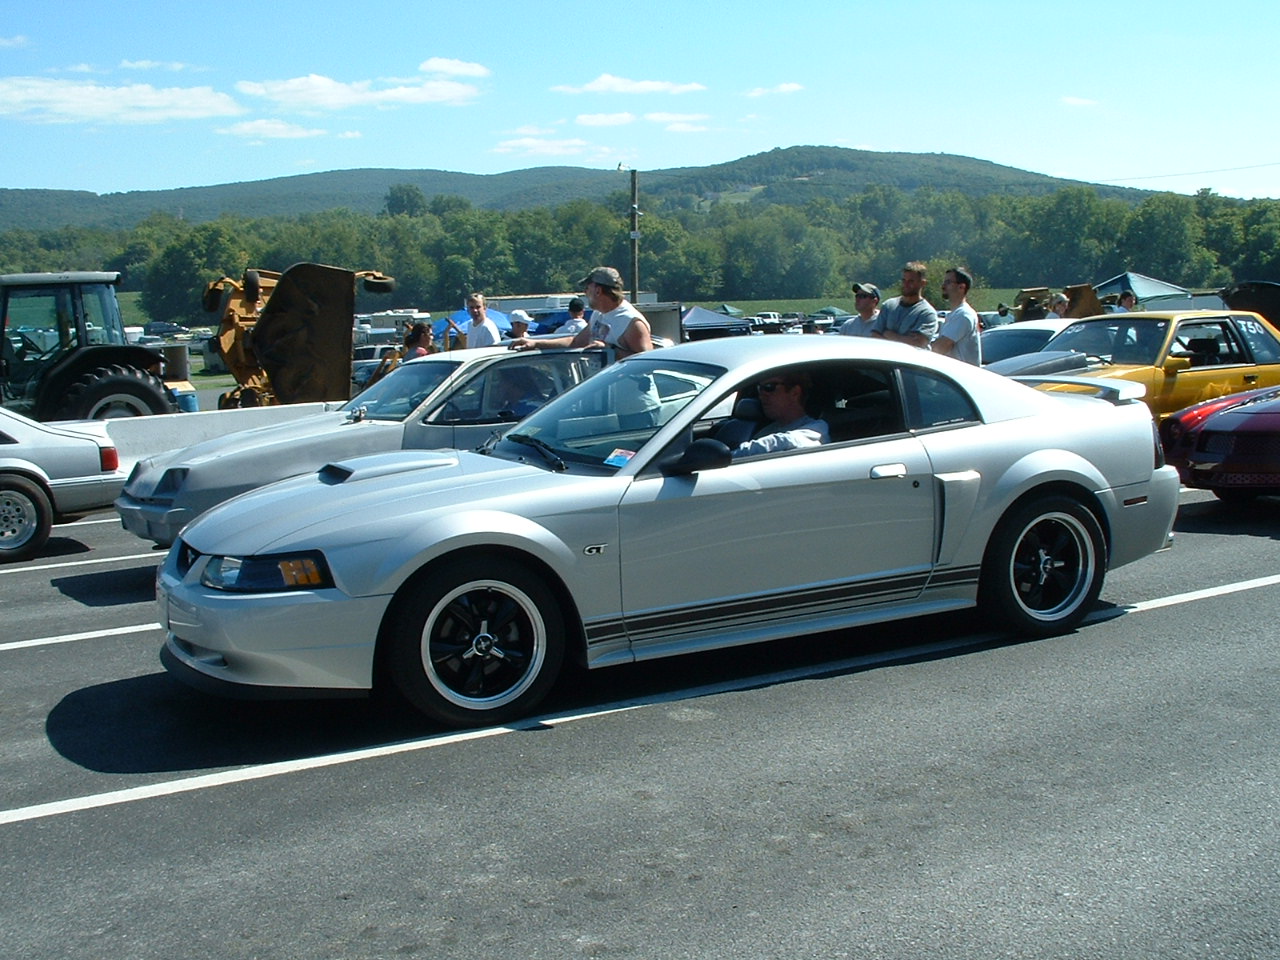 2001 Ford mustang gt quarter mile time #10